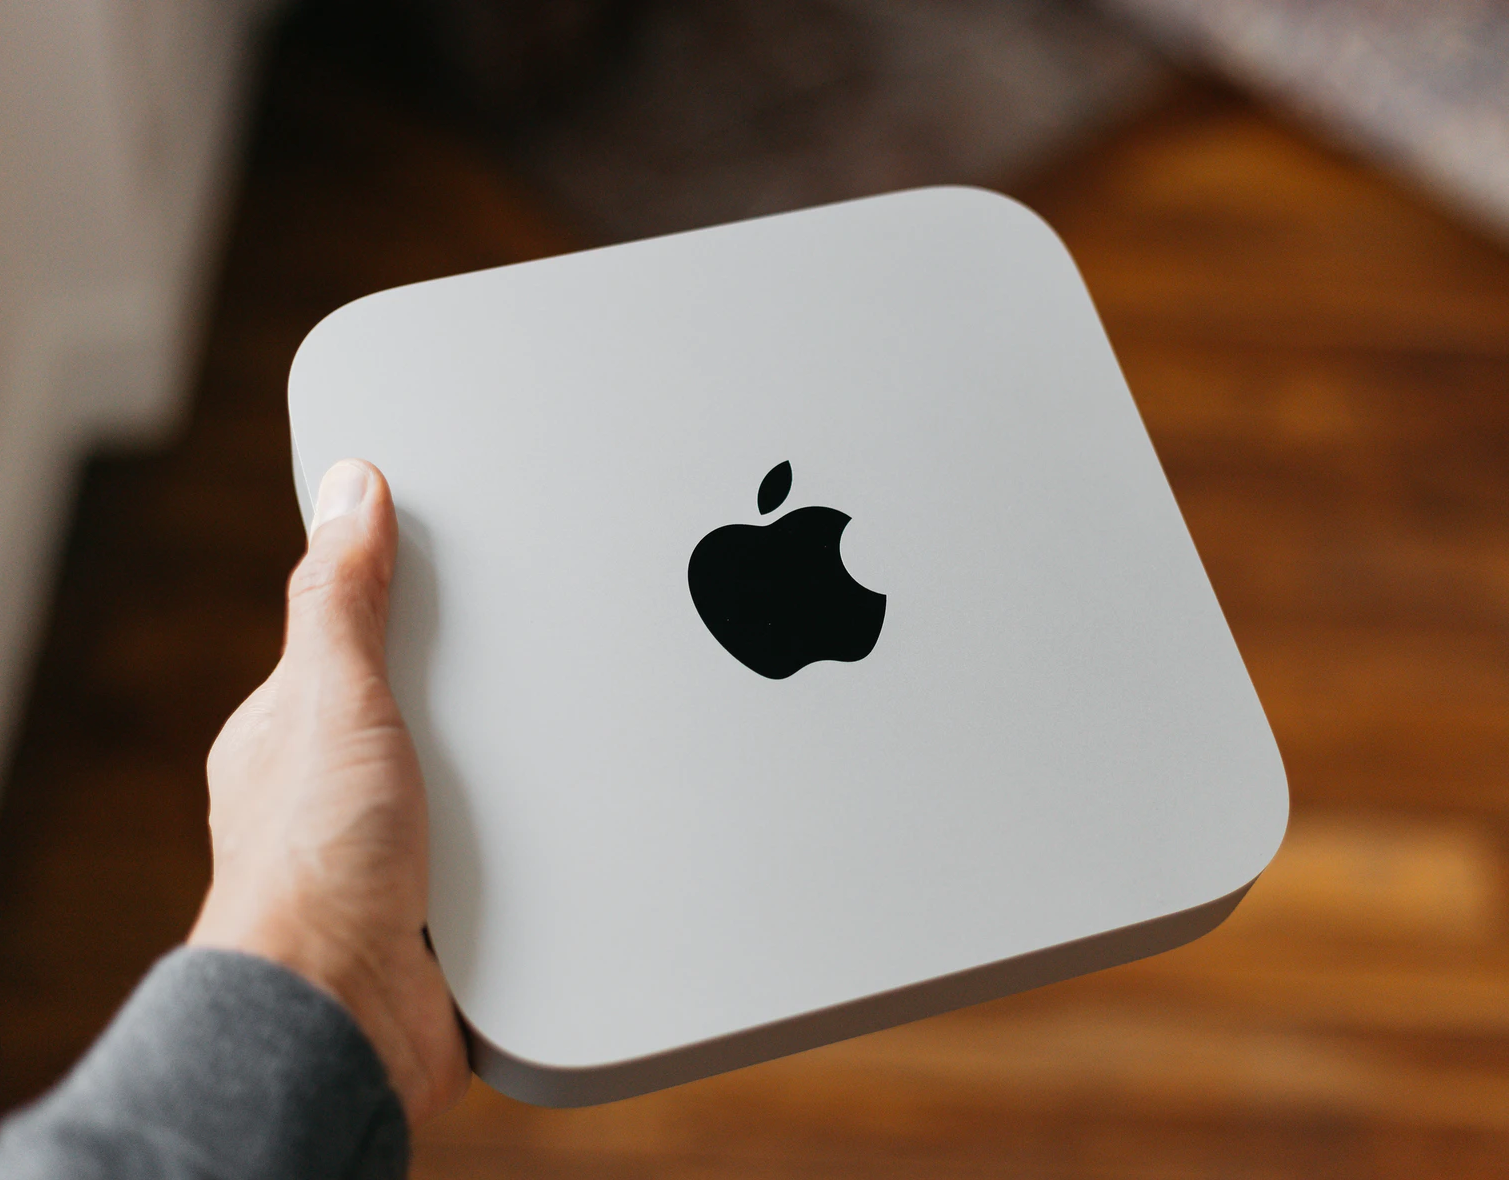 Apple Mac mini: YouTuber demonstrates that Apple mini-PC could be two-thirds smaller than its present size - NotebookCheck.net News